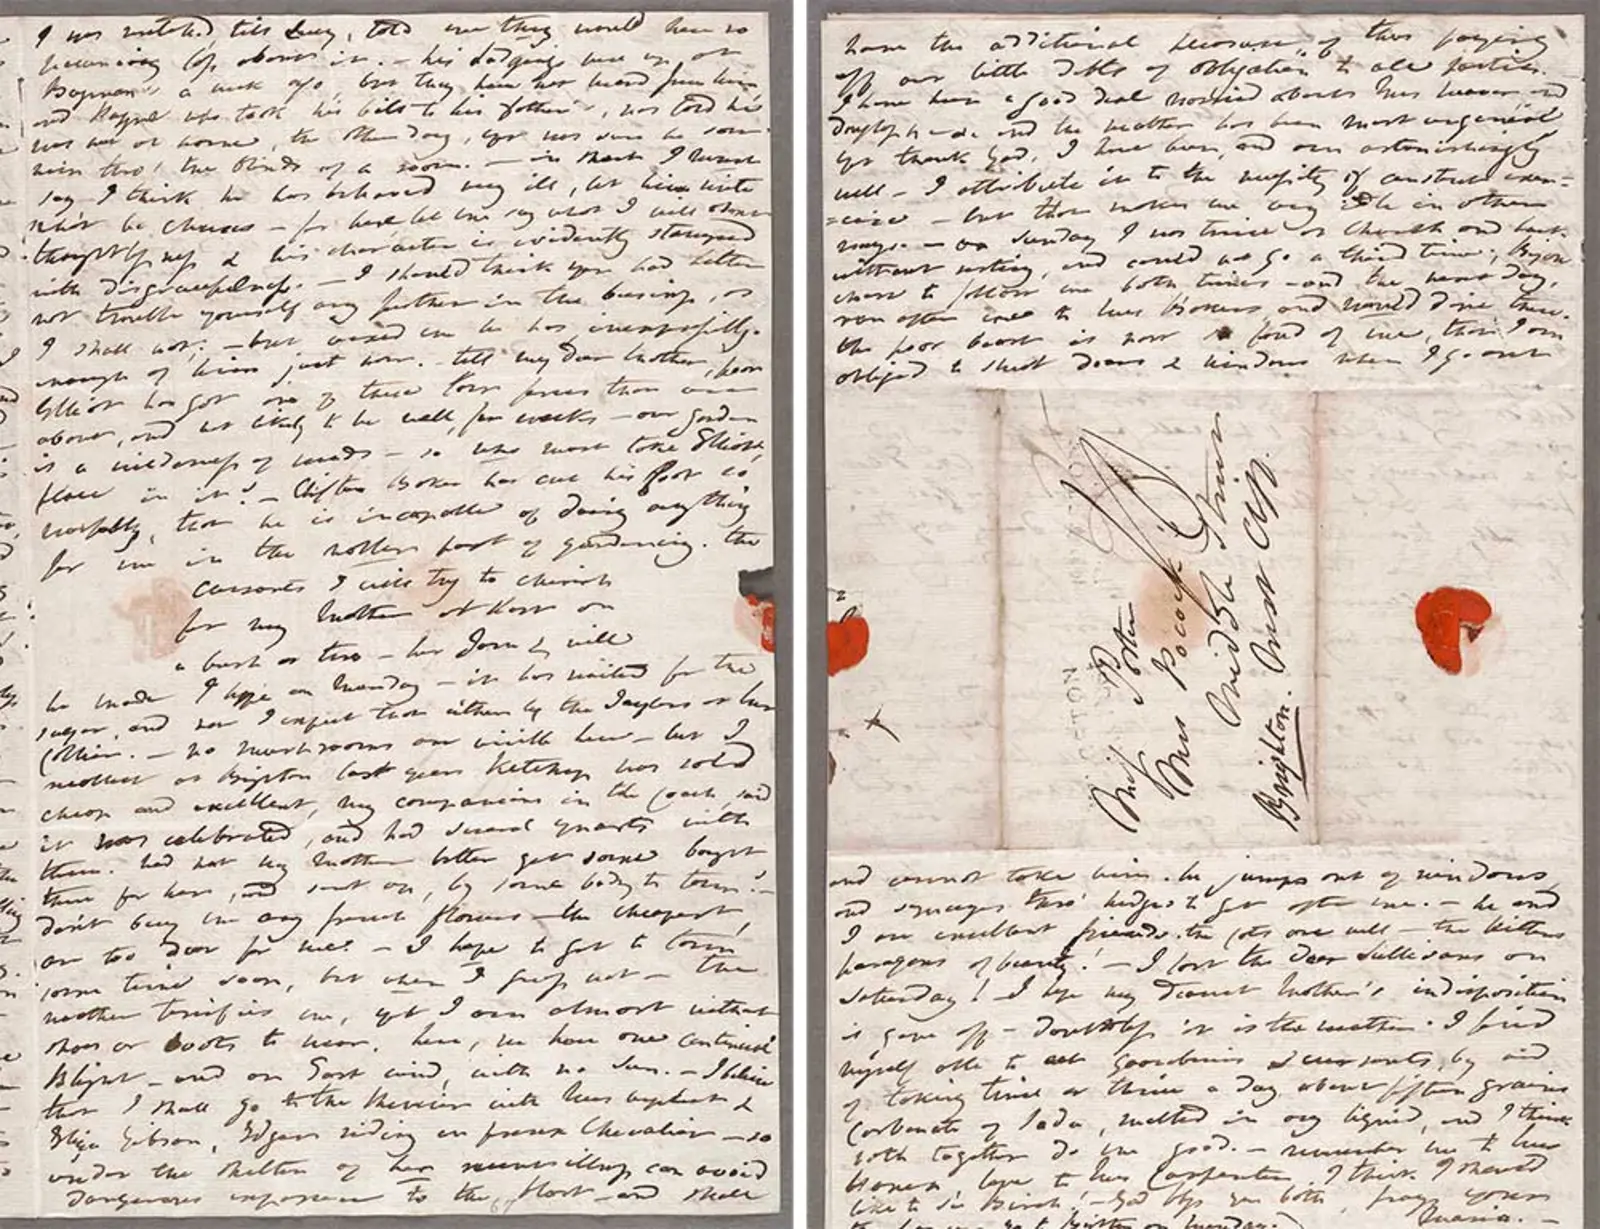 Anna Maria Porter to Jane Porter, July 15, 1820. Third page (left) and fourth page of a four-page letter.